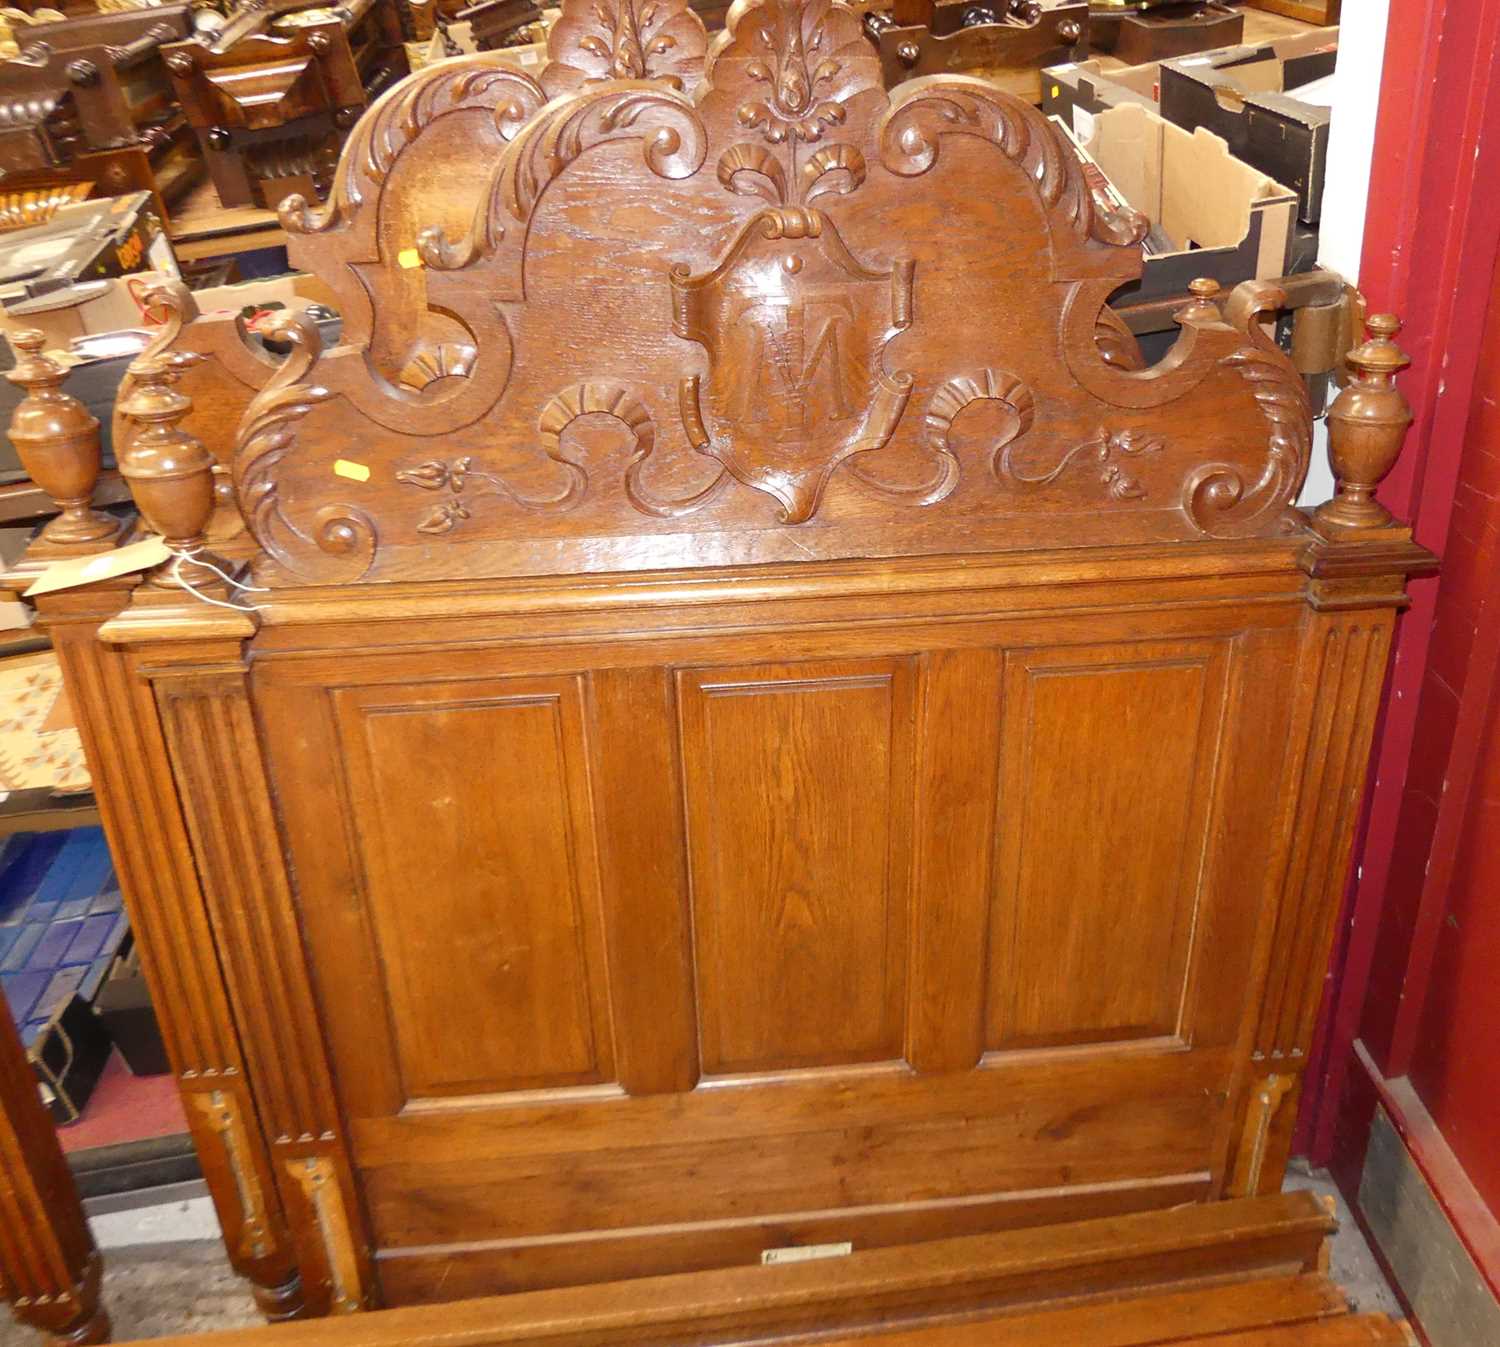 An early 20th century Belgian panelled oak single bedstead, having floral shaped and carved